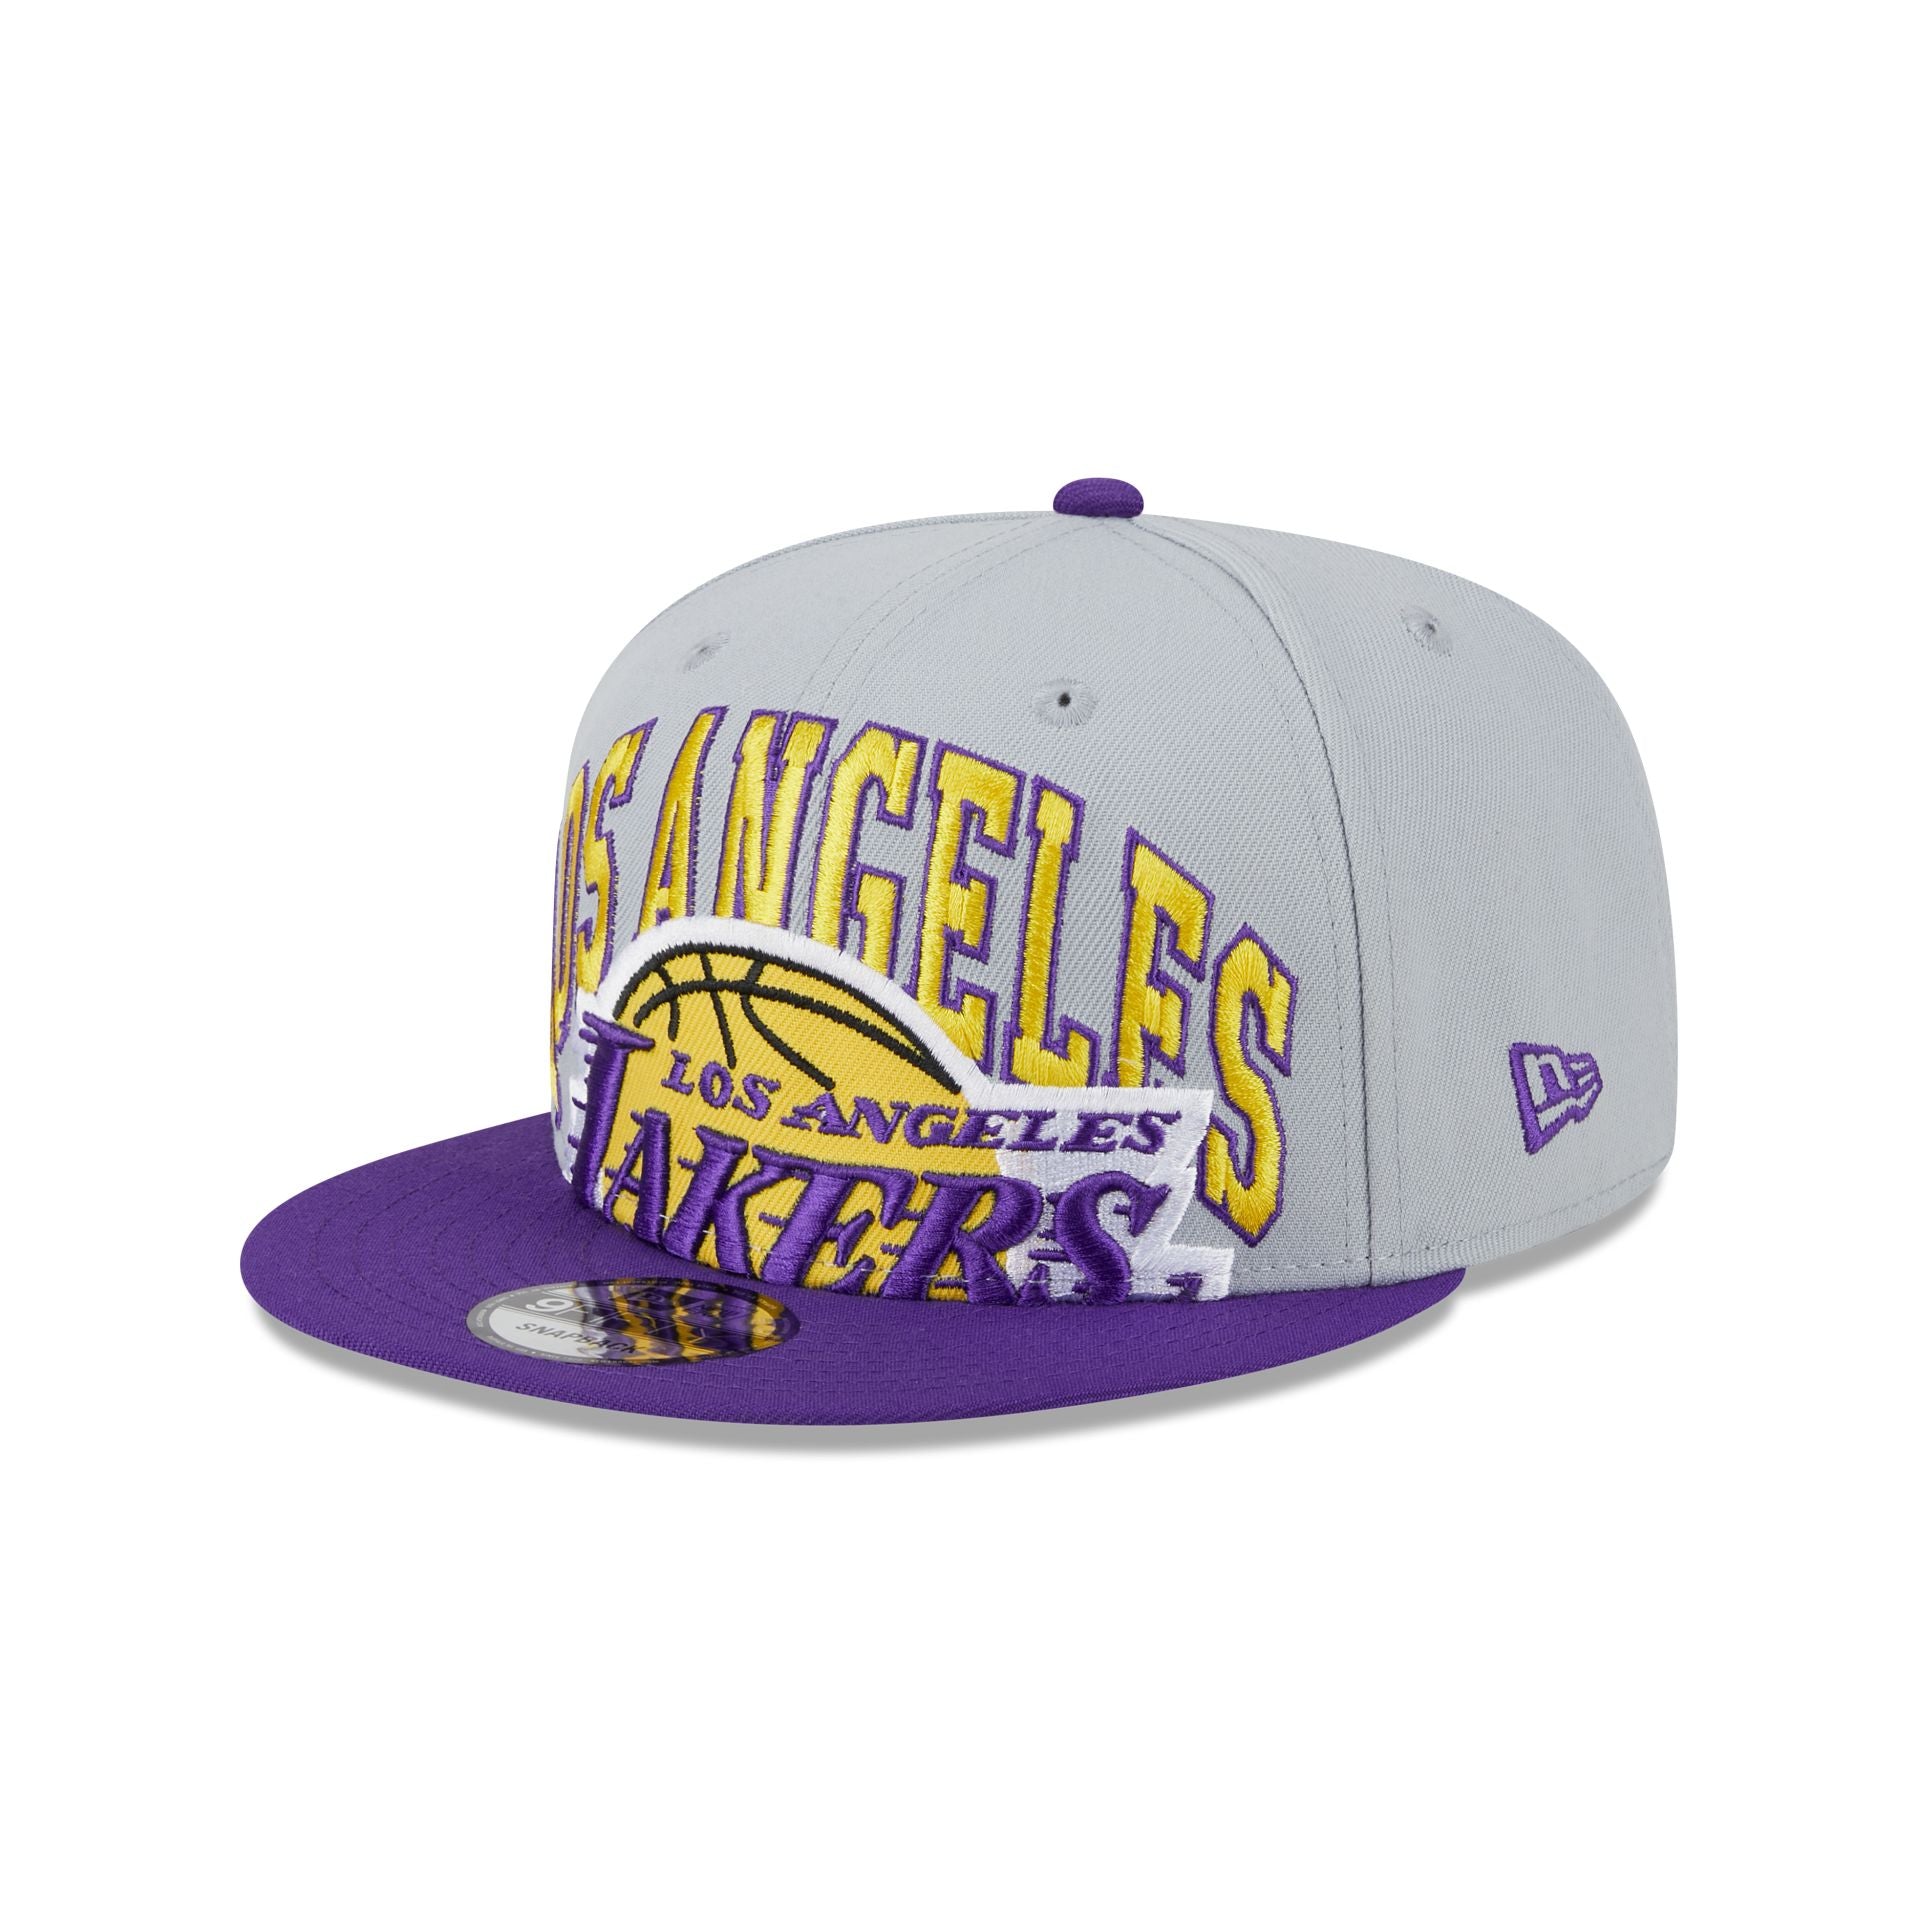 Los Angeles Clippers NBA Mitchell & Ness Vintage Retro Style Hat Cap  Snapback